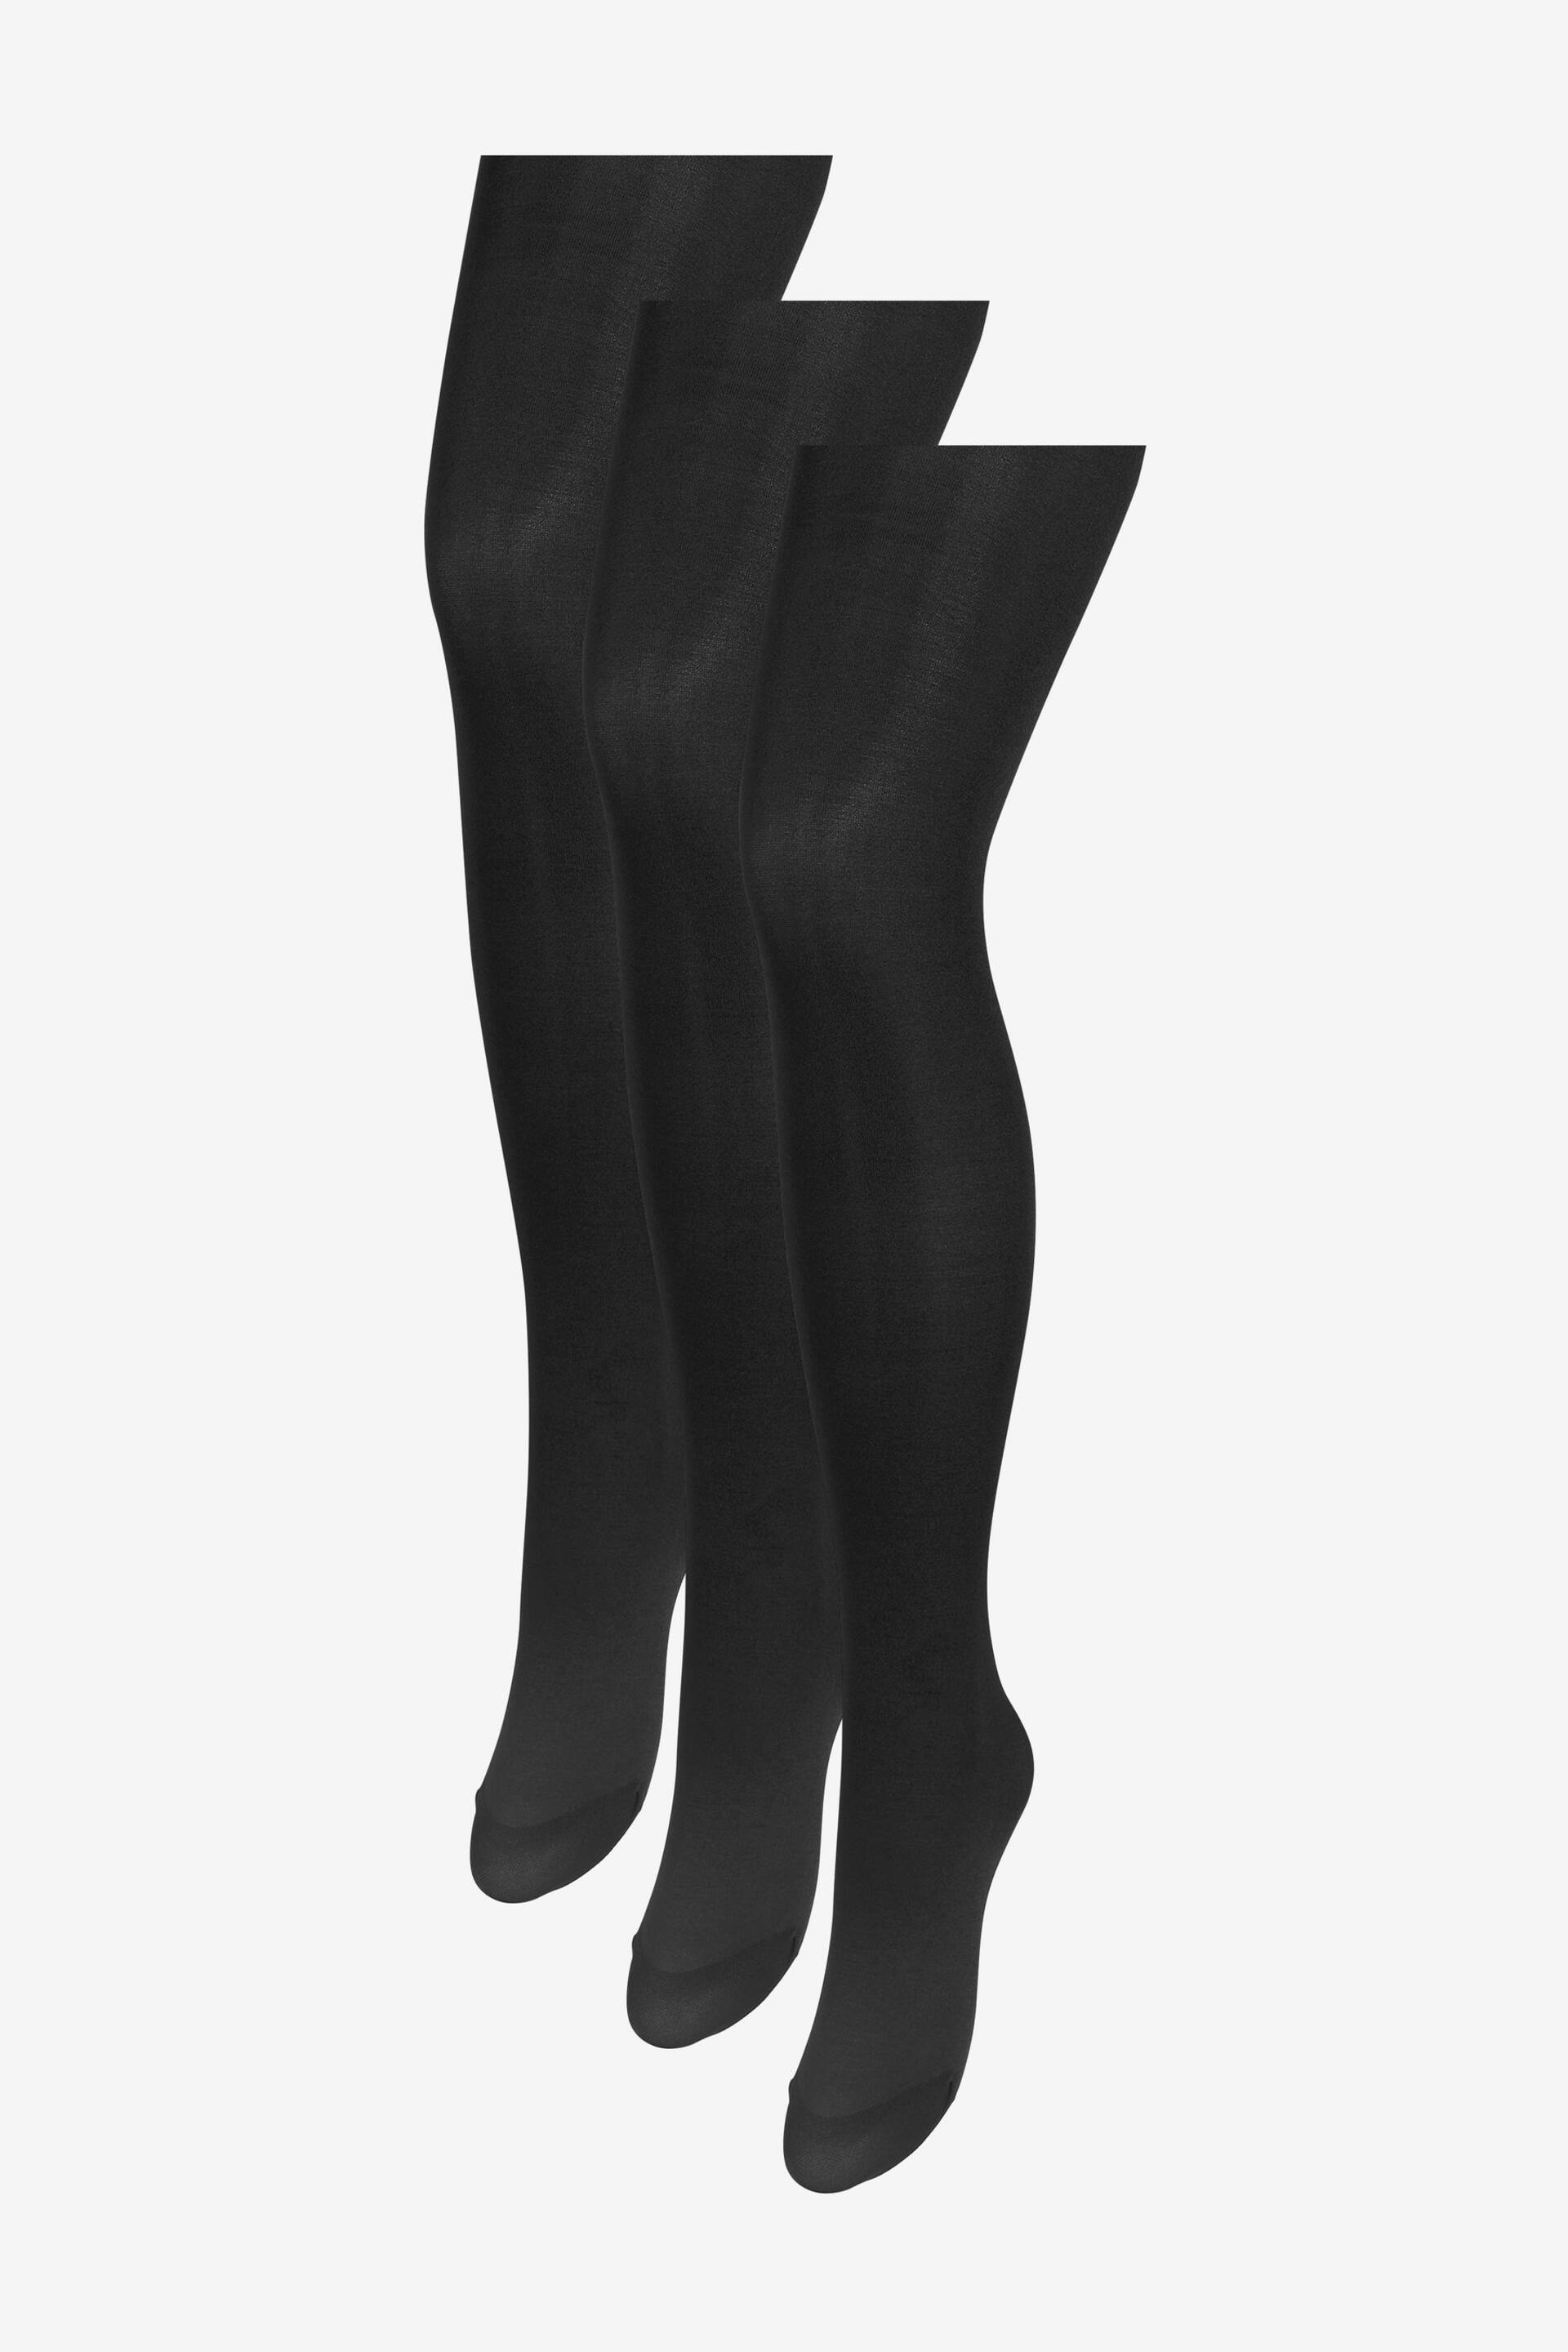 Black 3 Pack 60 Denier Opaque Tights - Image 3 of 4